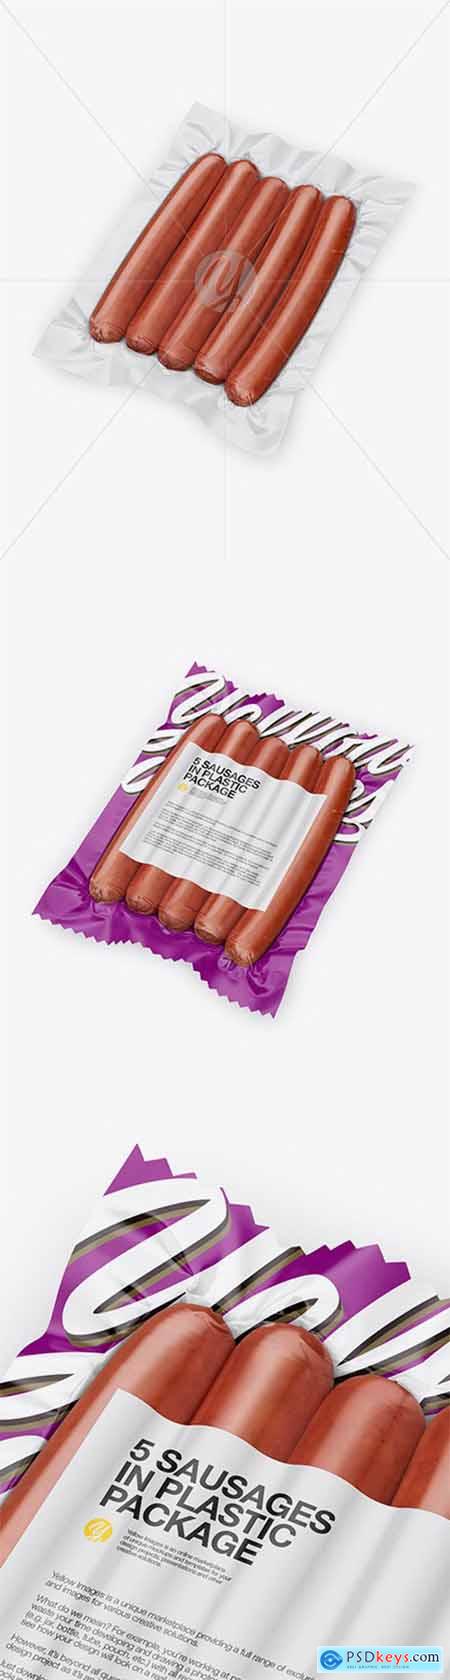 5 Smoked Sausages Pack - Half Side View 51839